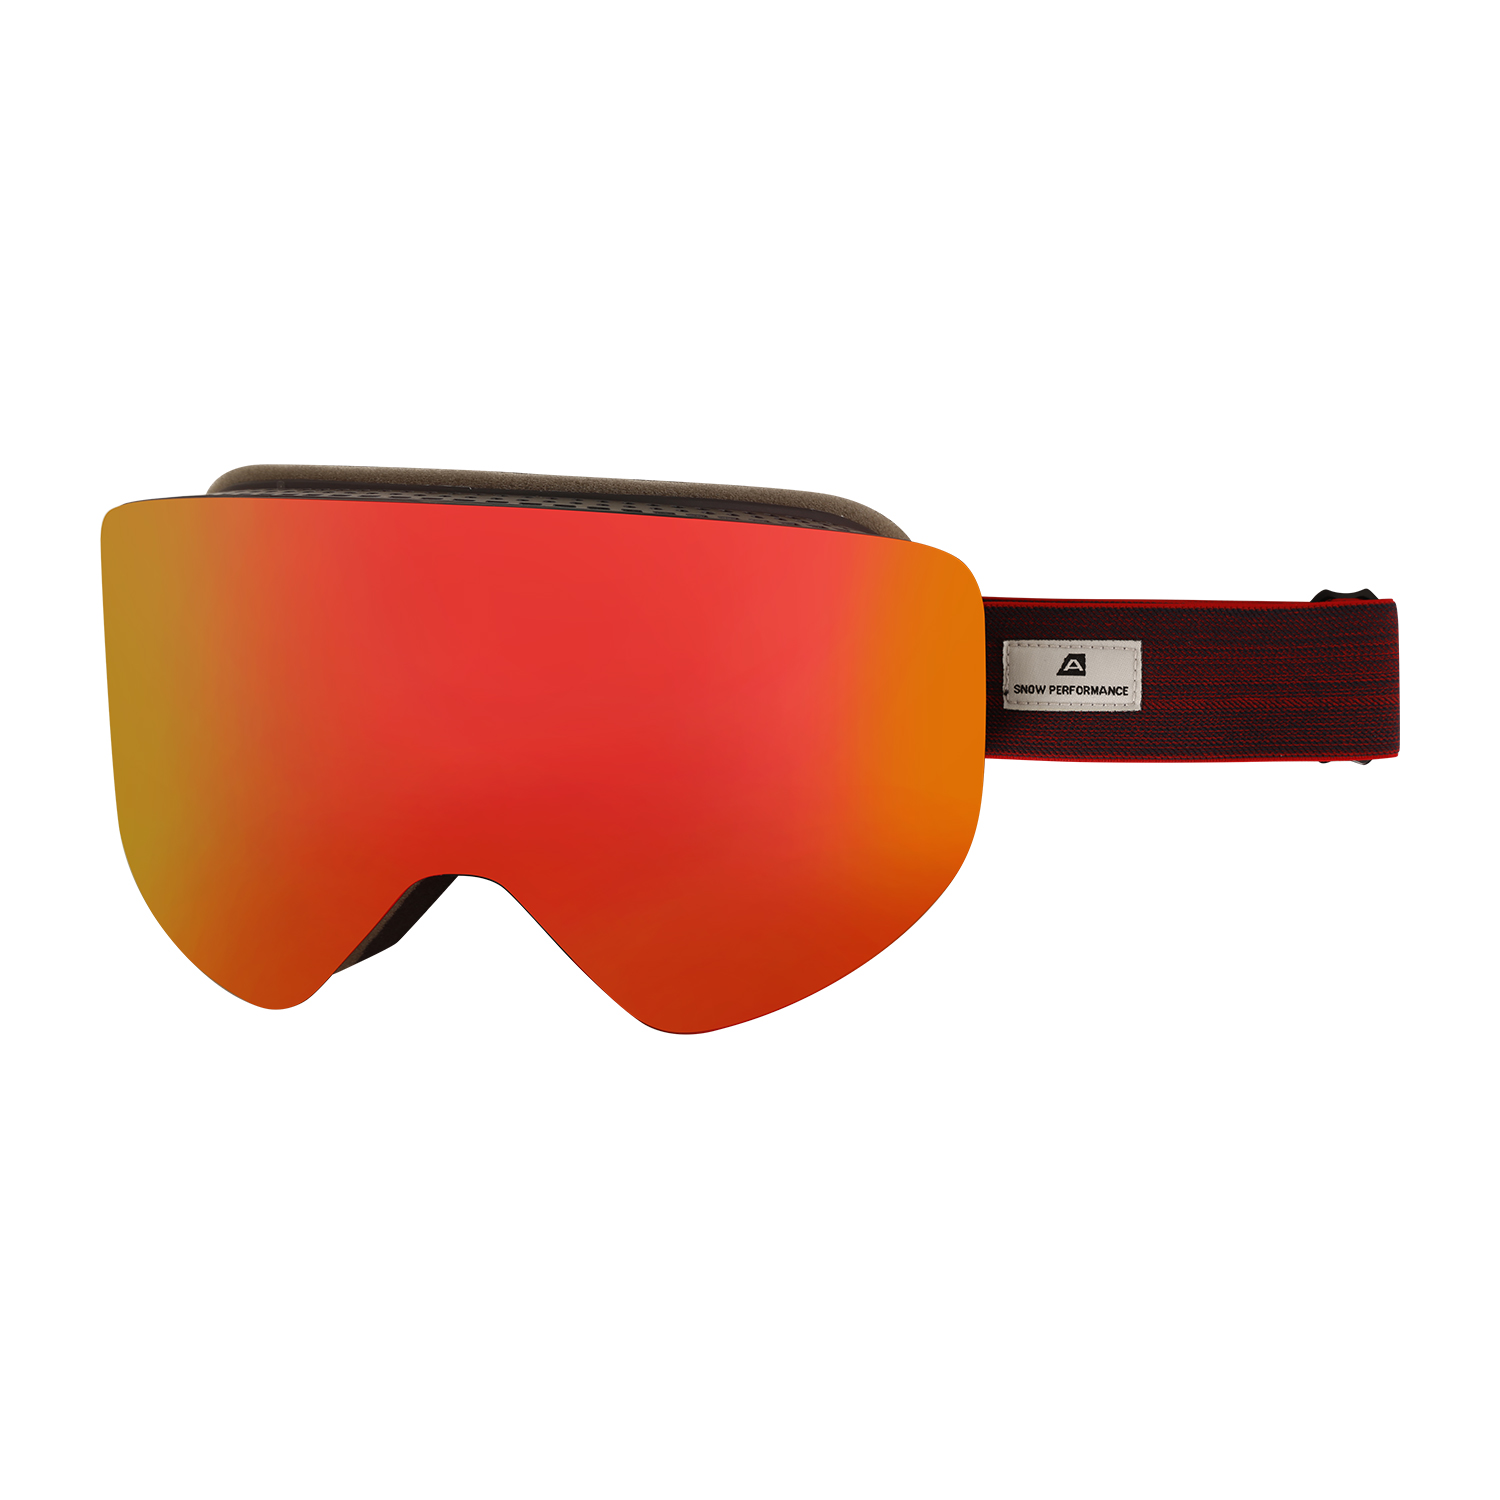 Ski goggles AP HELLQE olympic red